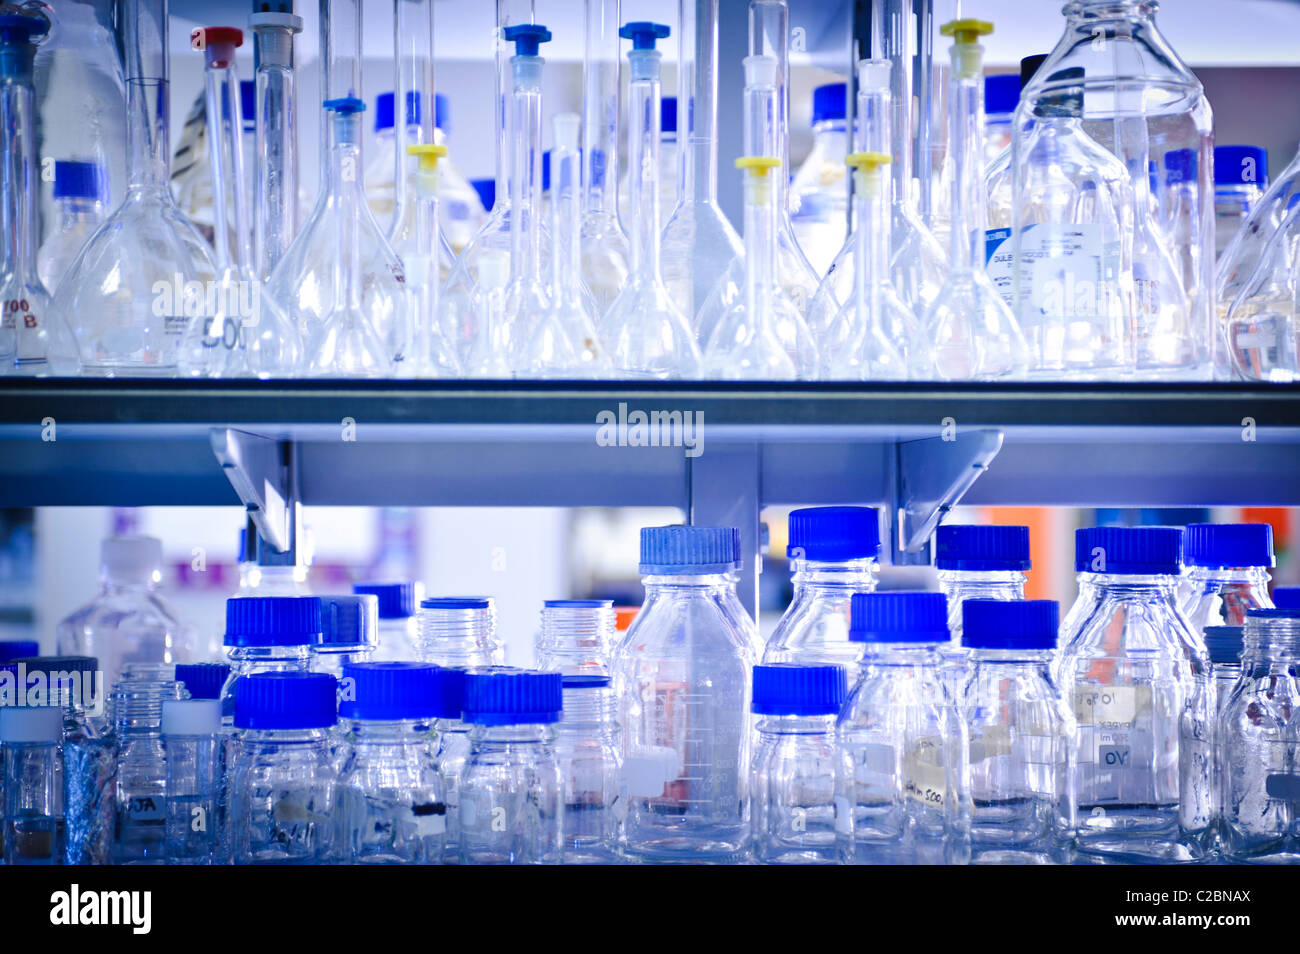 Glass bottles and jars beakers and test tubes with bright blue tops on shelf in science laboratory Stock Photo